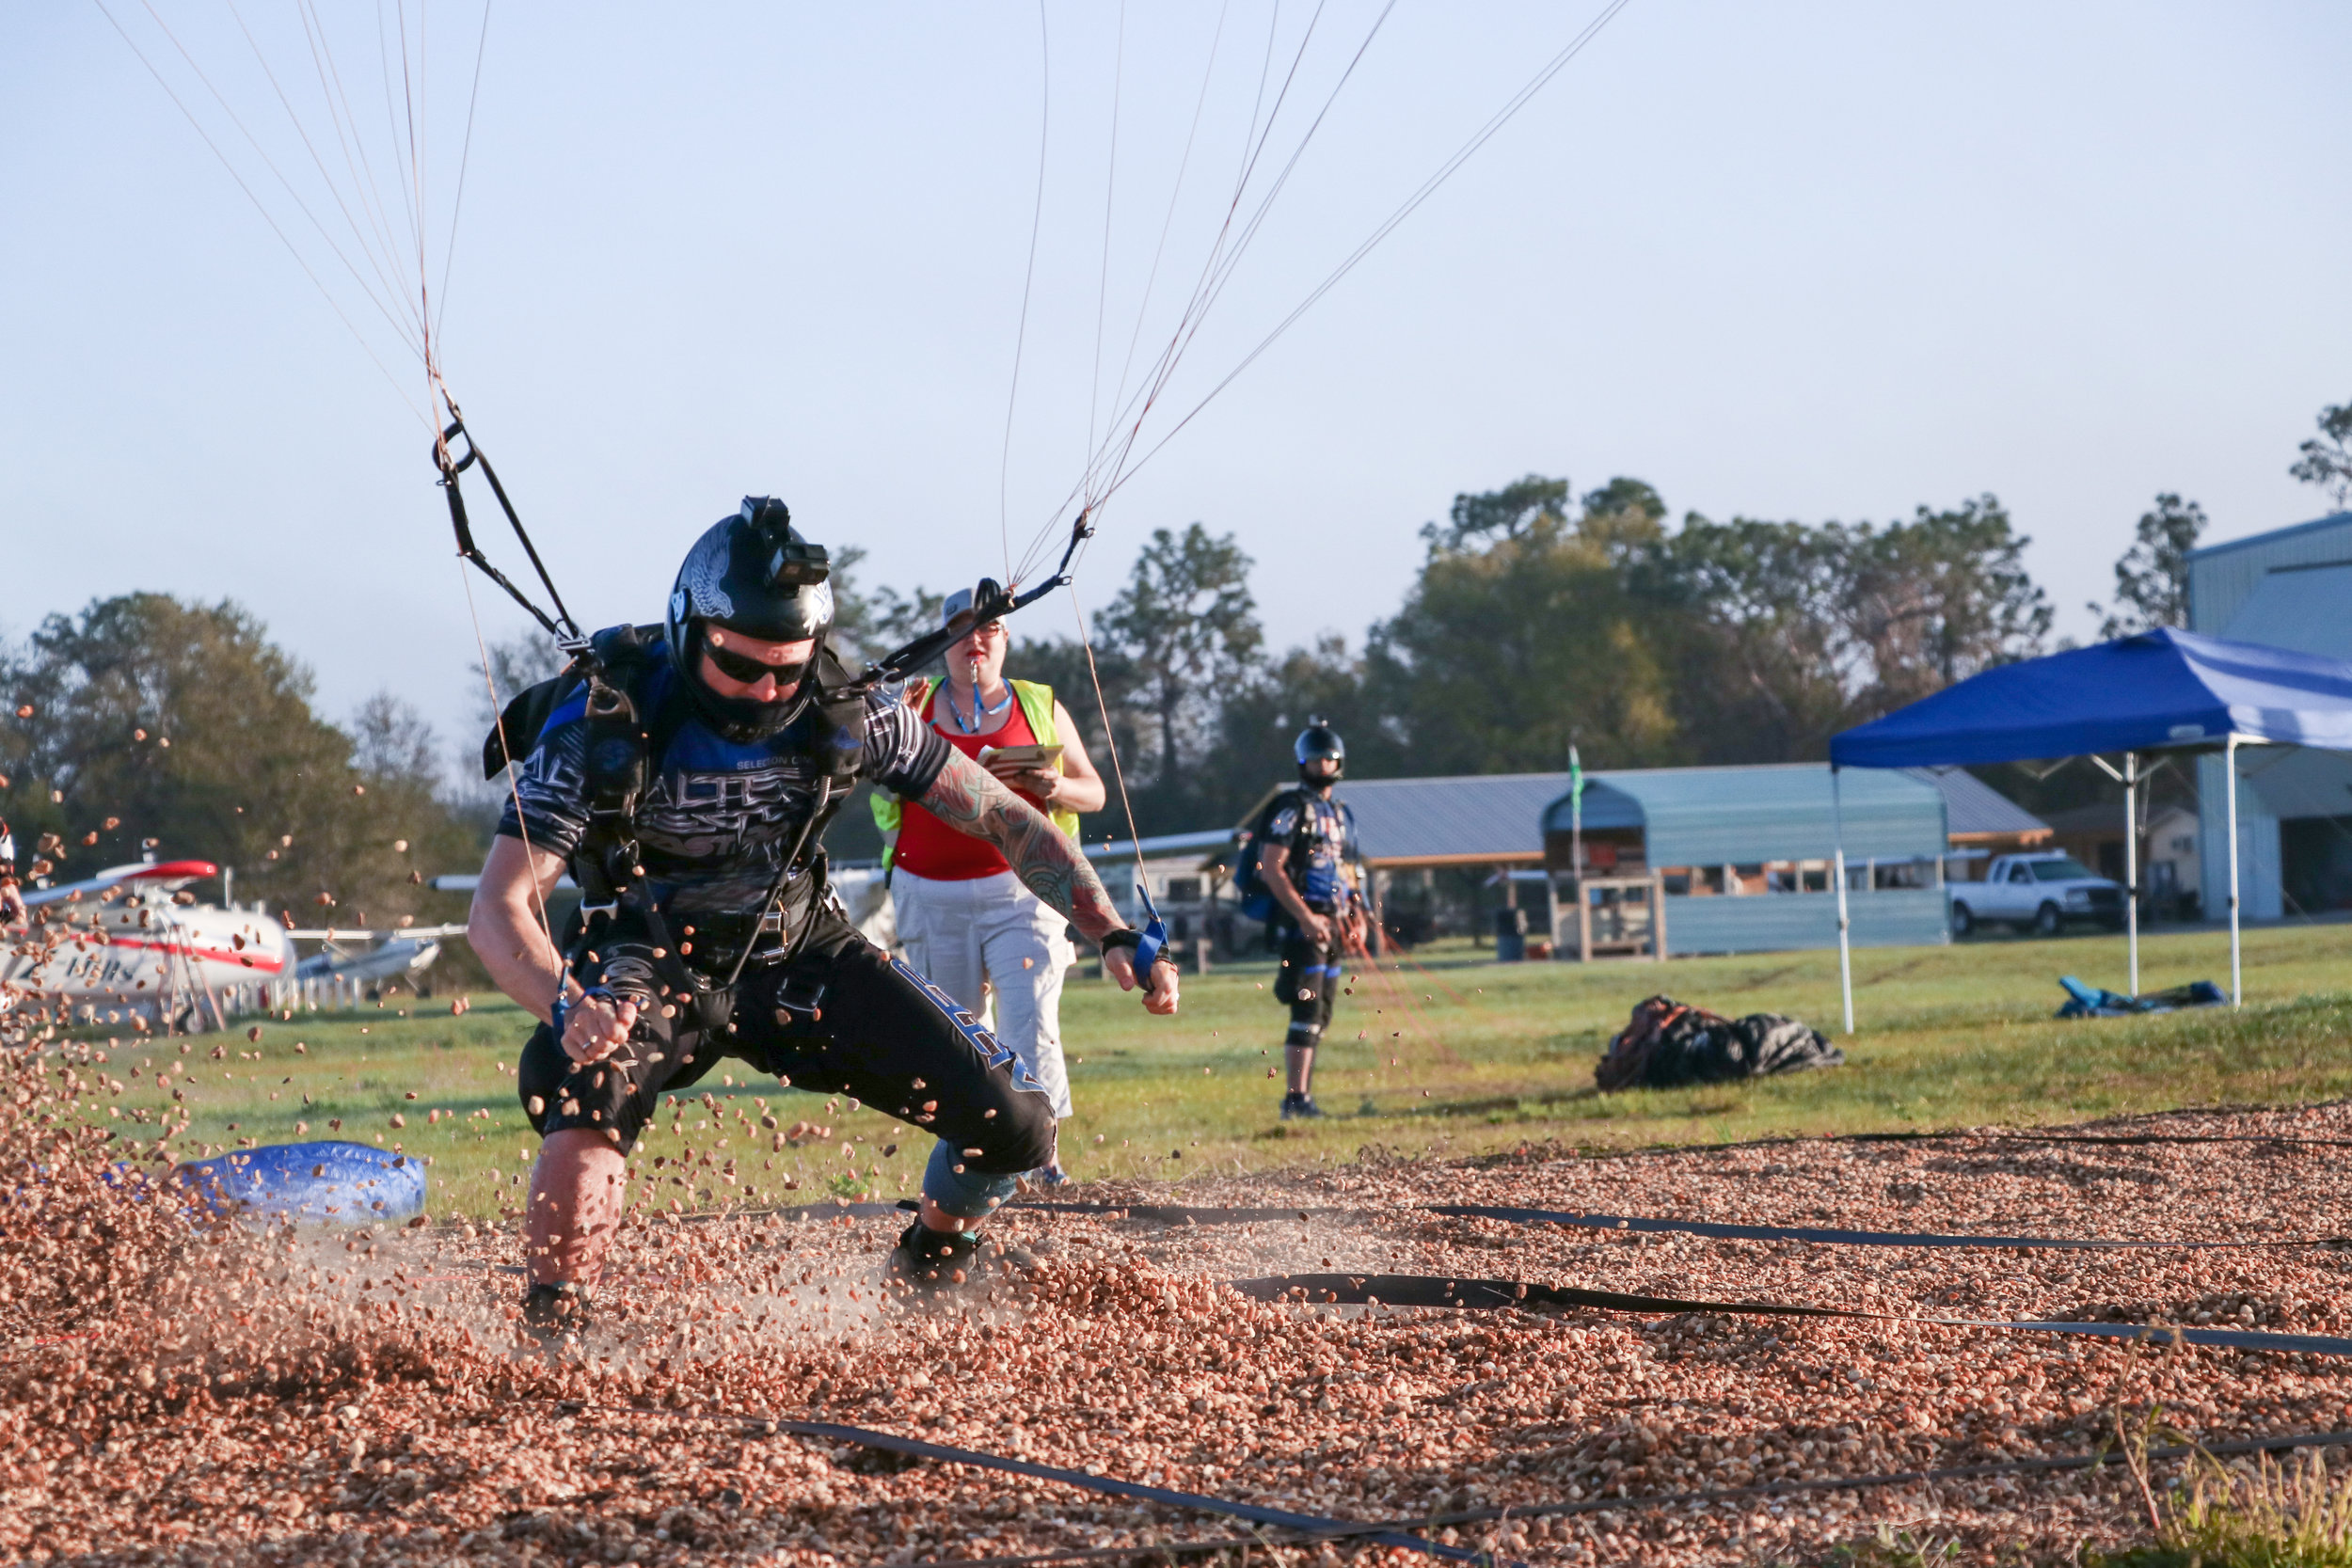 High-Kick-Photography-Skydiving-Canopy-Piloting-Swoop-High-Performance-Parachute-Skydive-City-Zephyrhills-ZHills-Florida-Sports-Active-Competition-LR-1.jpg